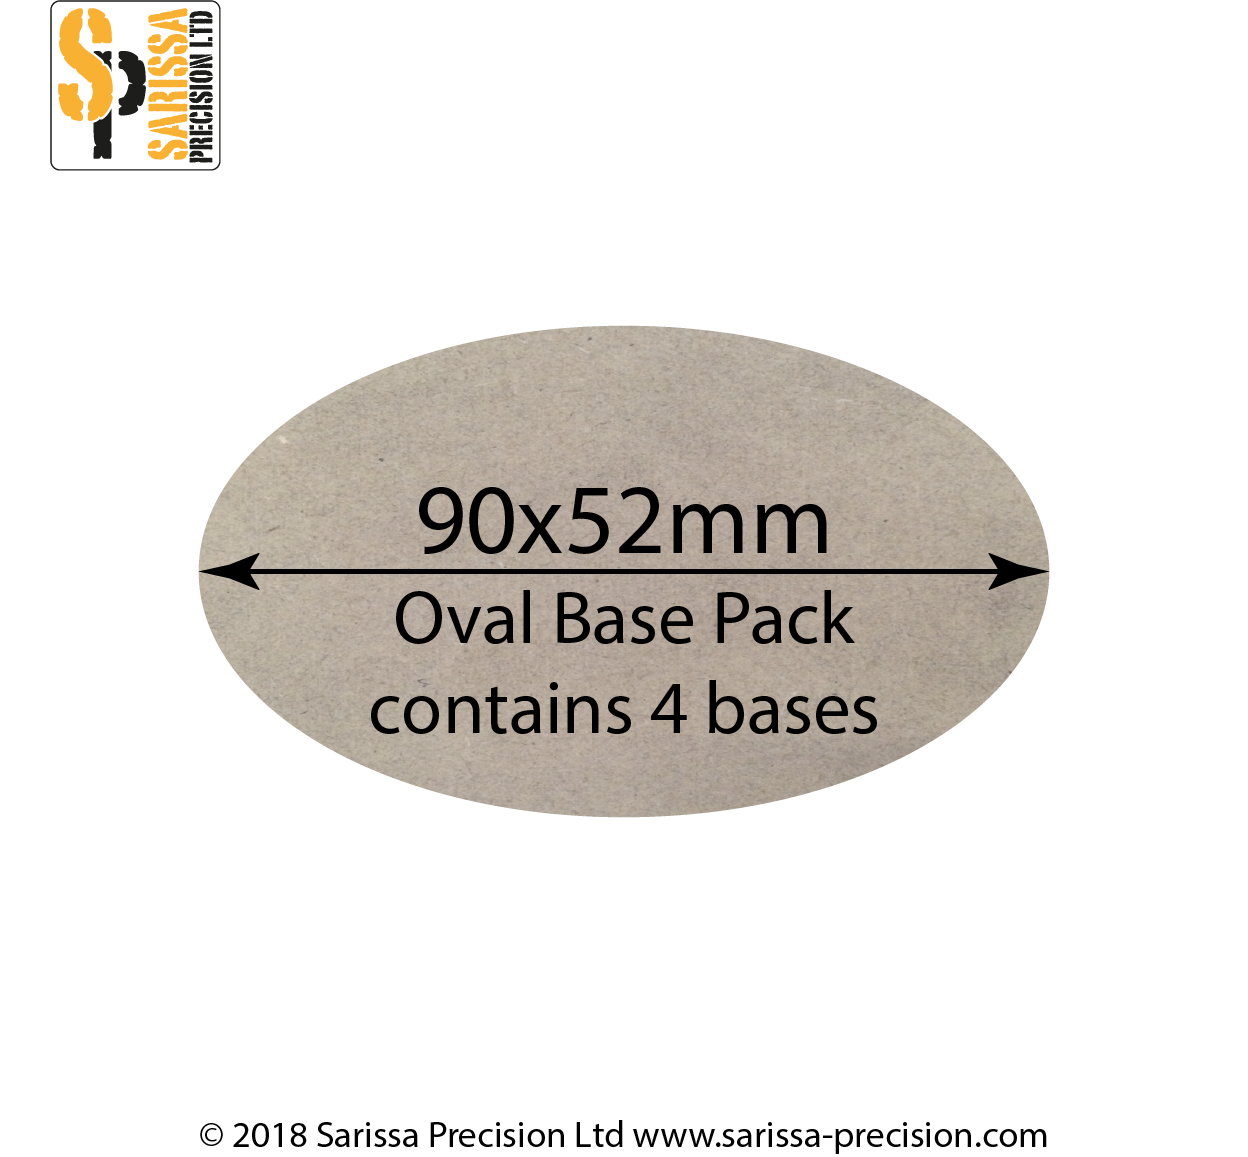 90 x 52mm Oval Base Pack